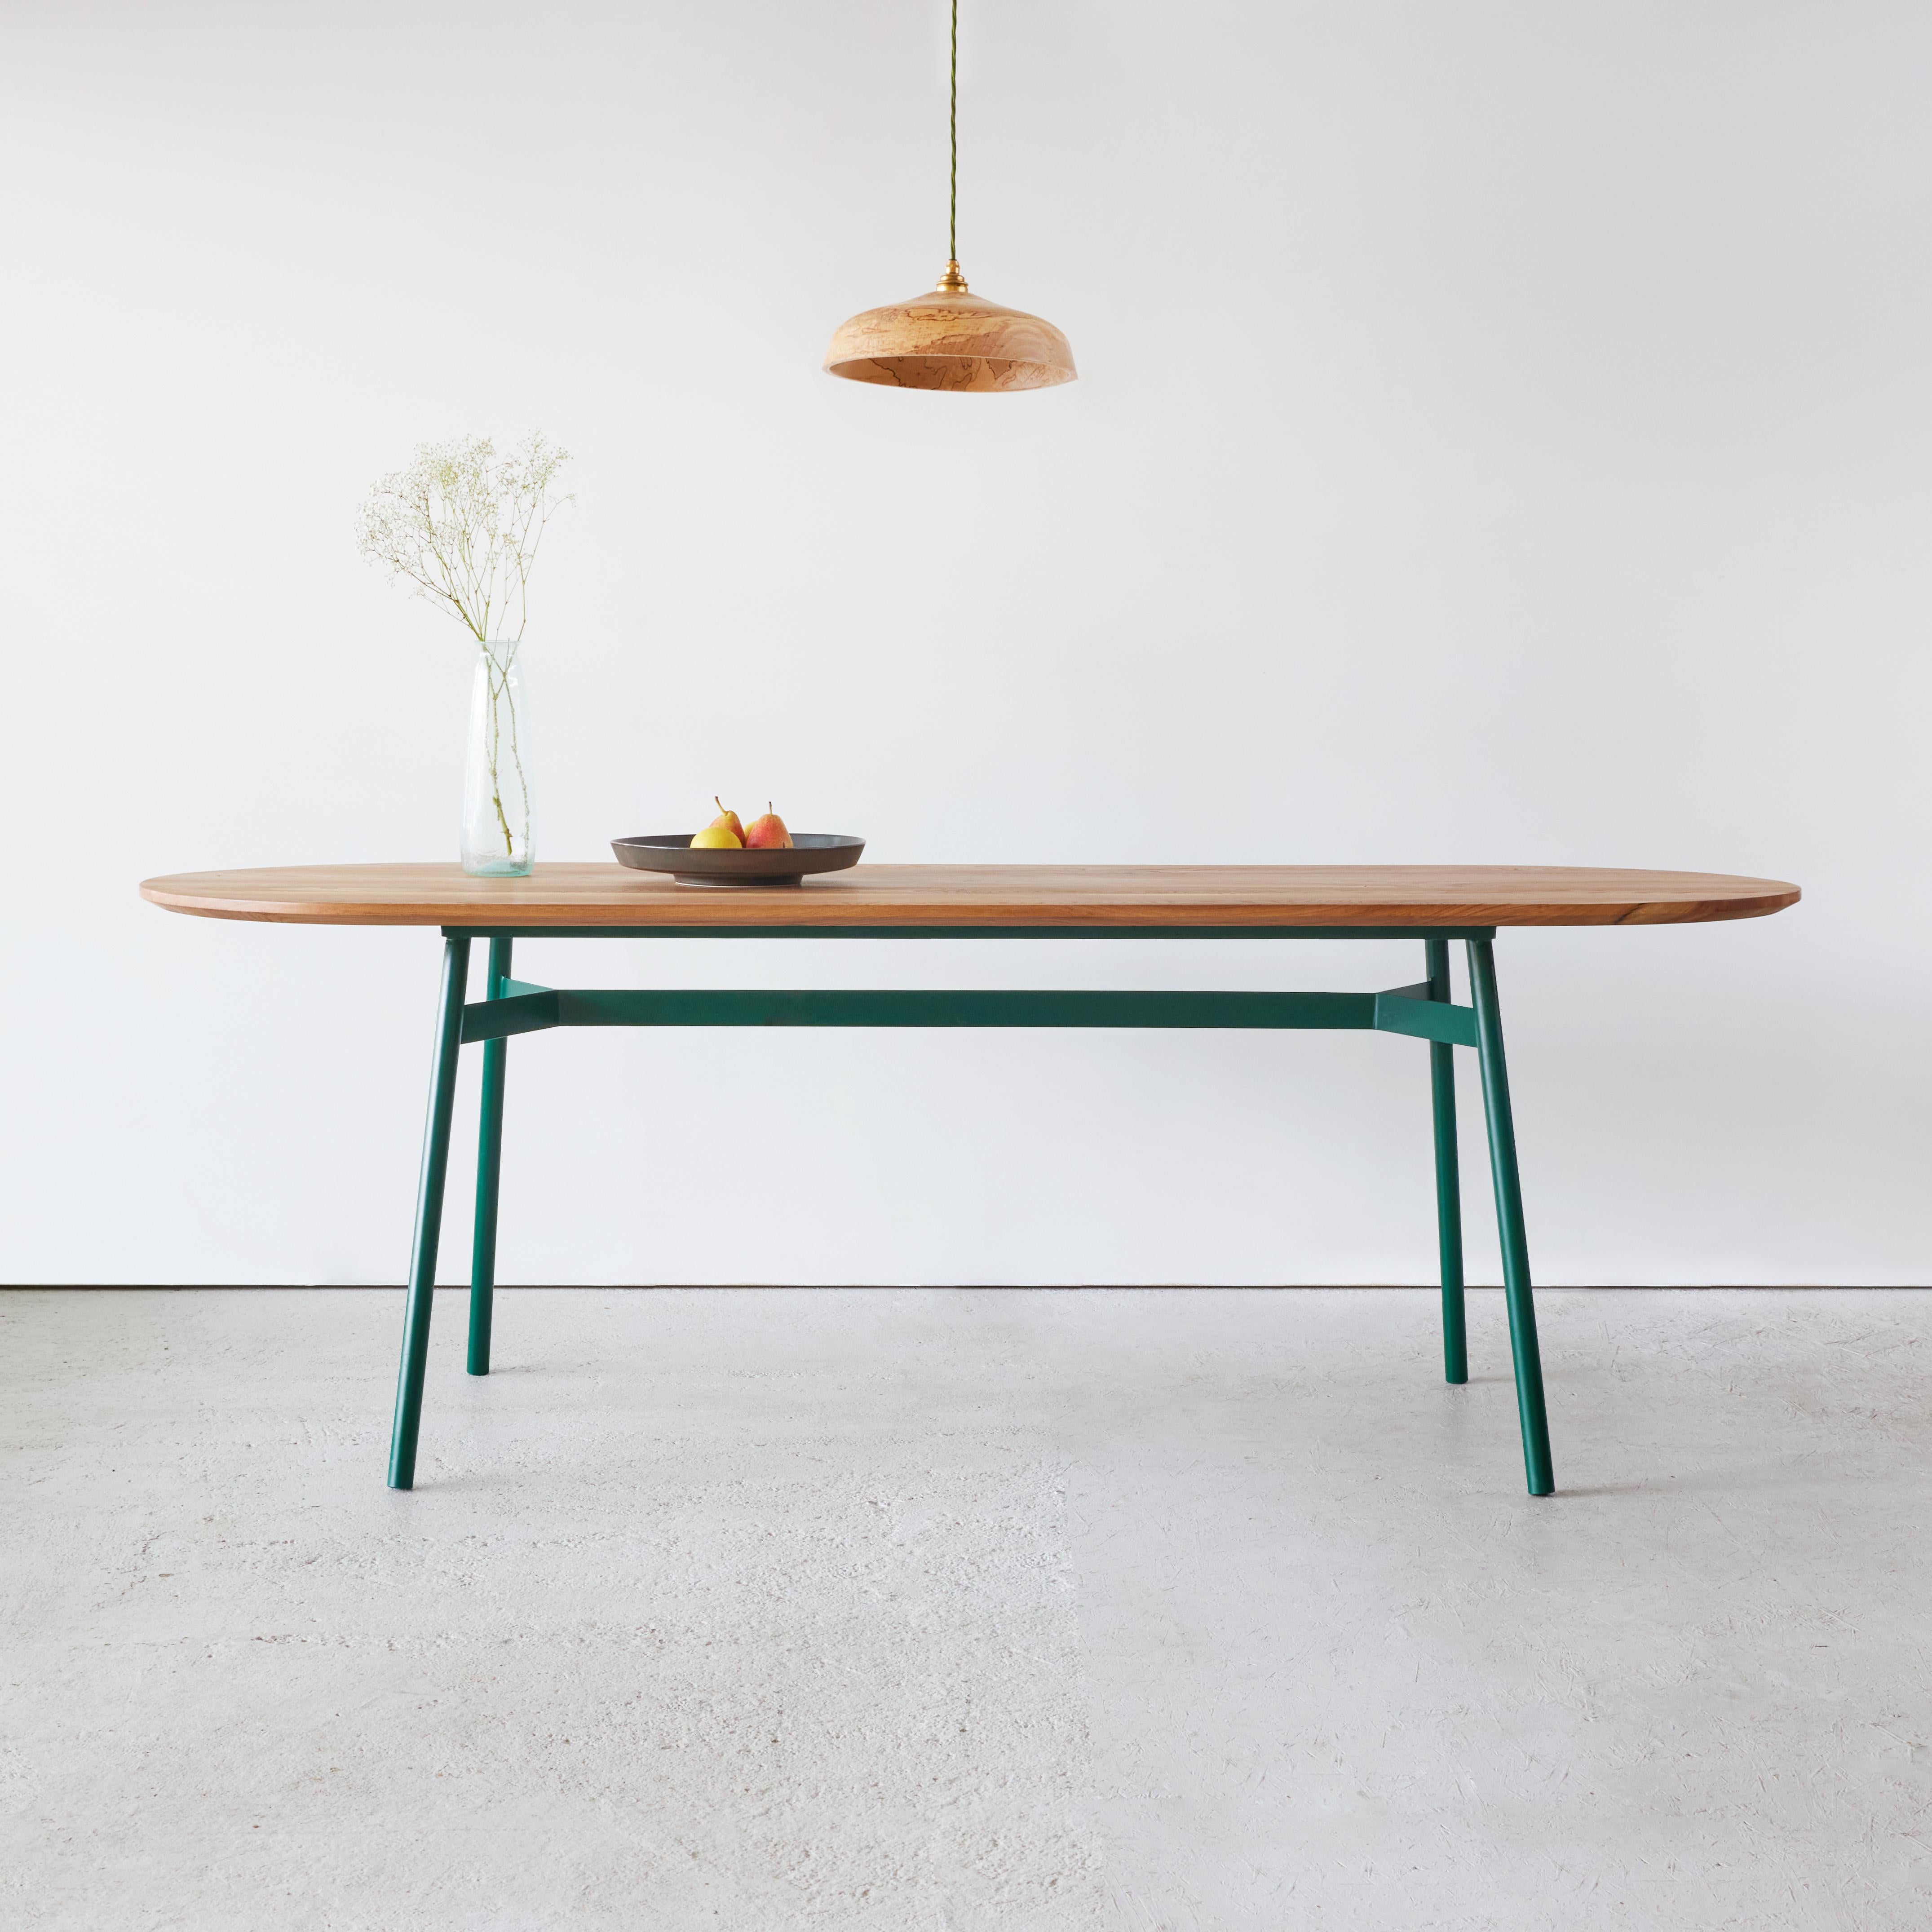 This contemporary dining table unites elegance and comfort. With its striking yet simple form, the Muse fits into a variety of living spaces. 

The table has an elegantly rounded tabletop, so there is always room for one more person. Crafted by